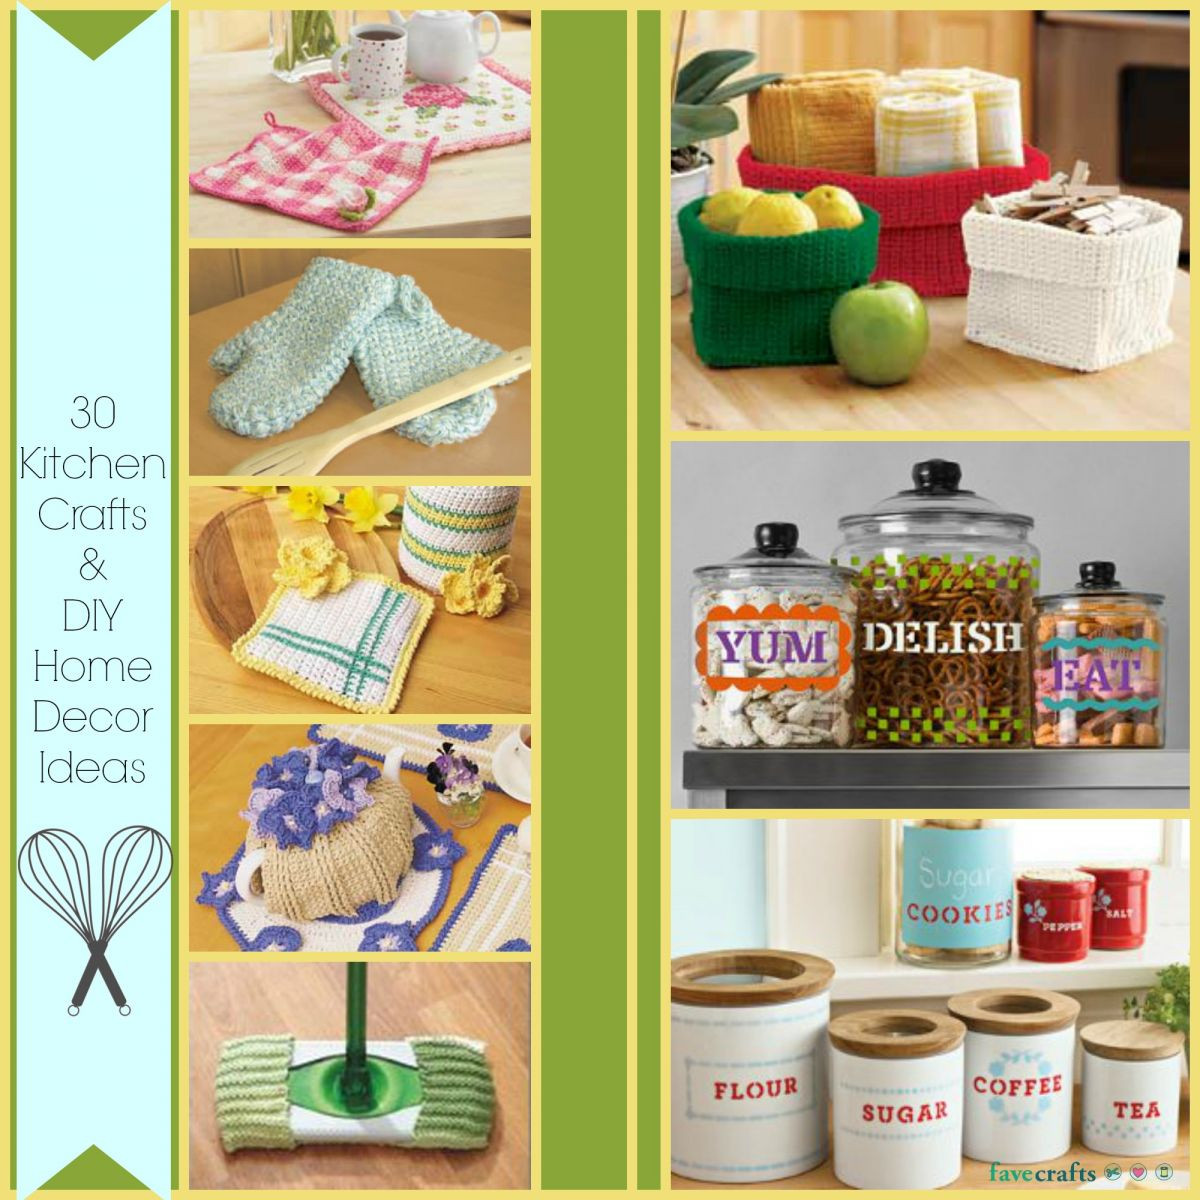 Craft Ideas For Home Decor
 30 Kitchen Crafts and DIY Home Decor Ideas